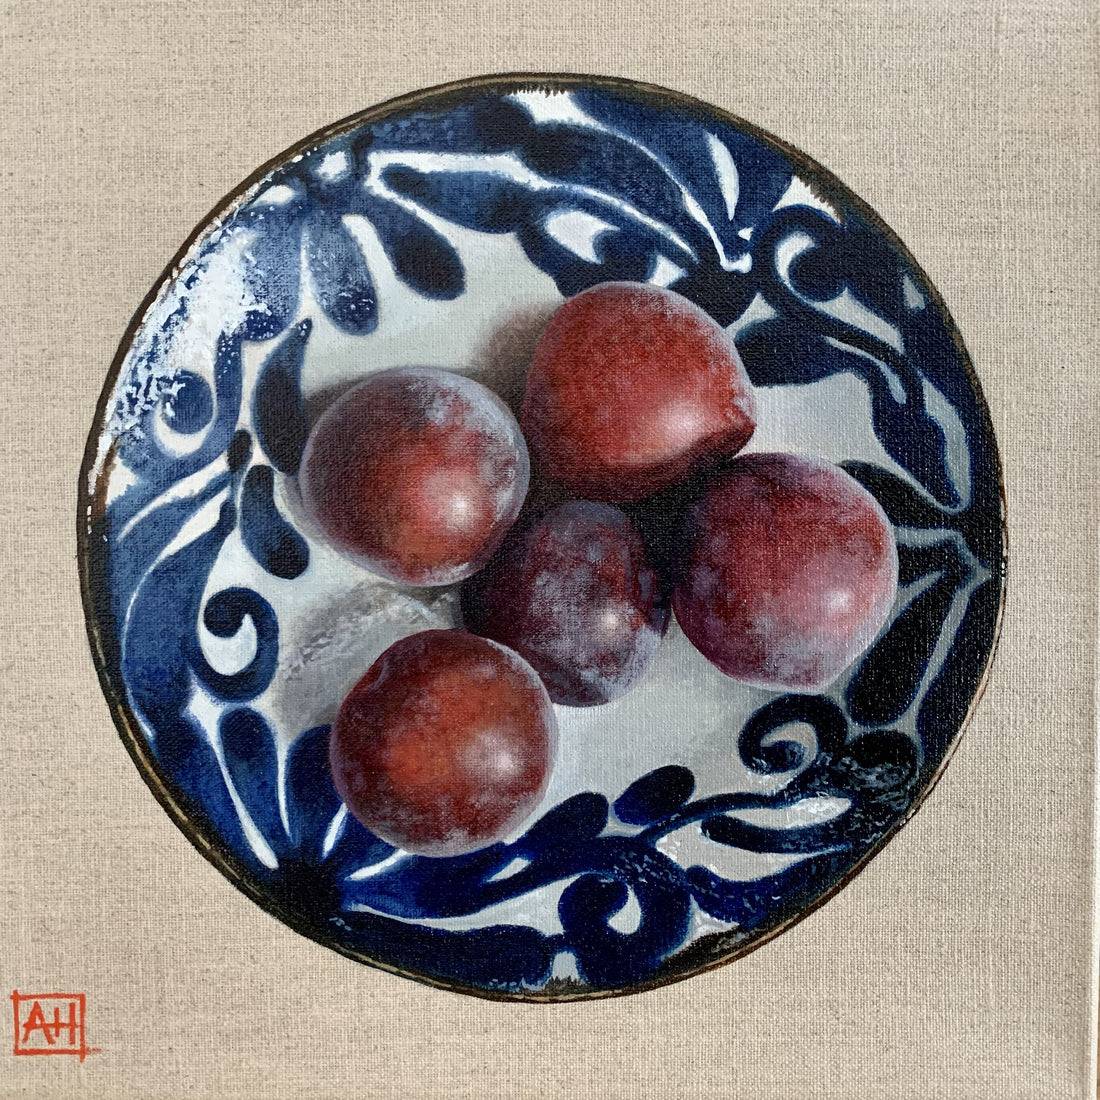 Bird's eye view painting of five plums in a ceramic bowl with blue glaze details on the rim